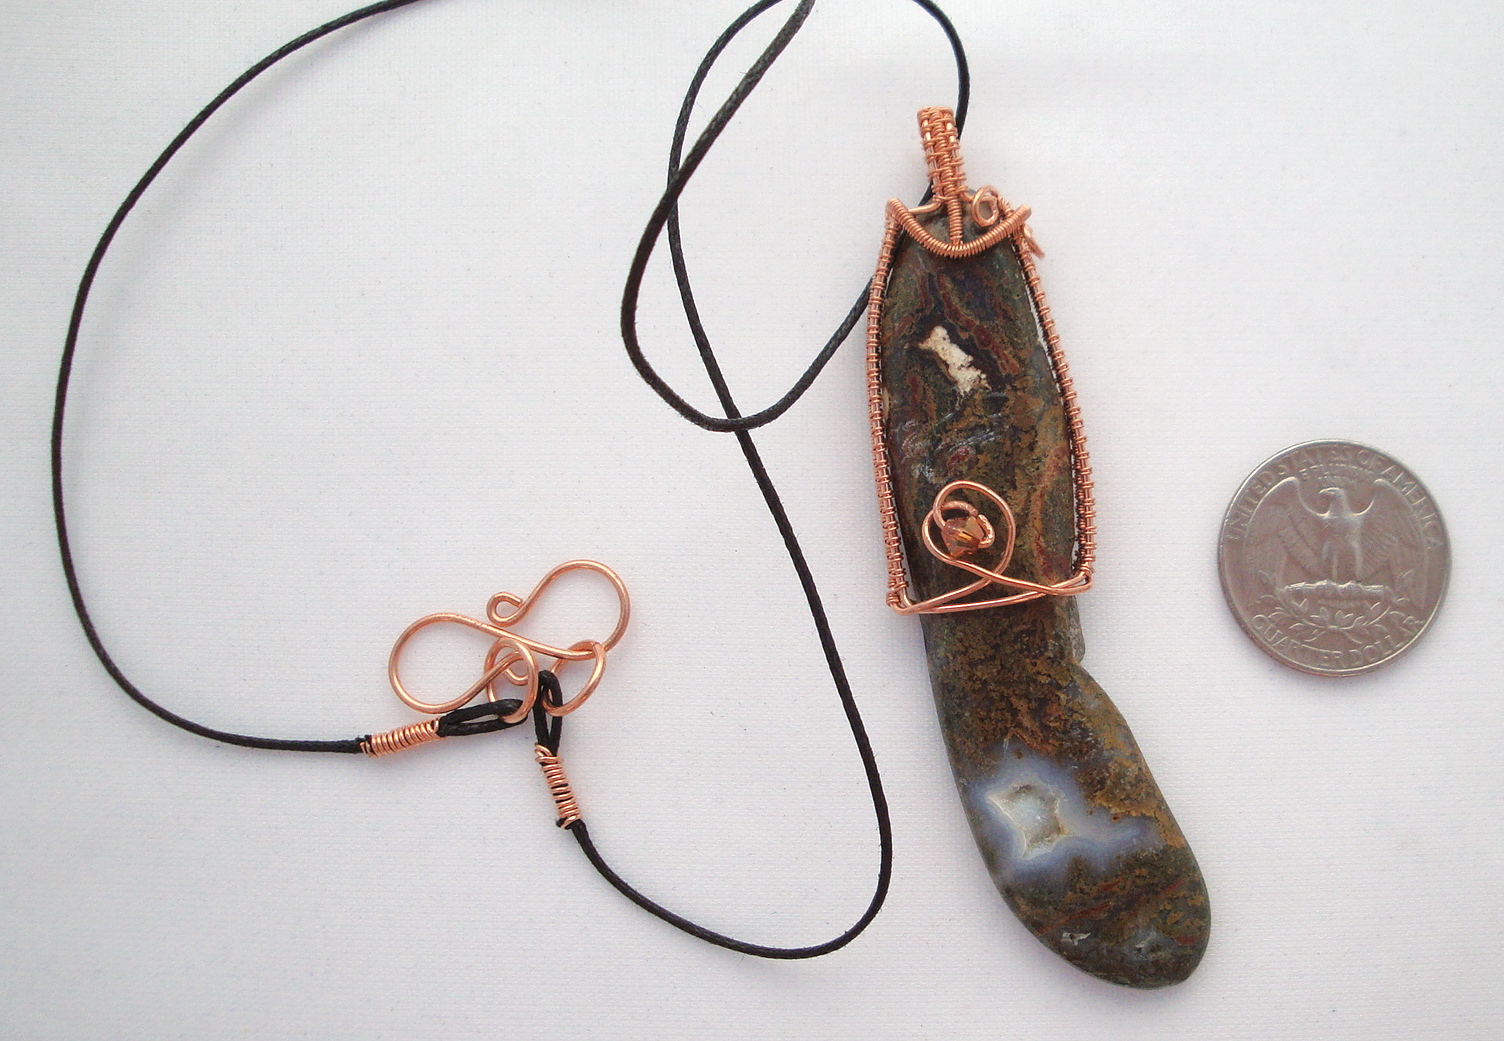 Long brown stone wrapped with copper wire